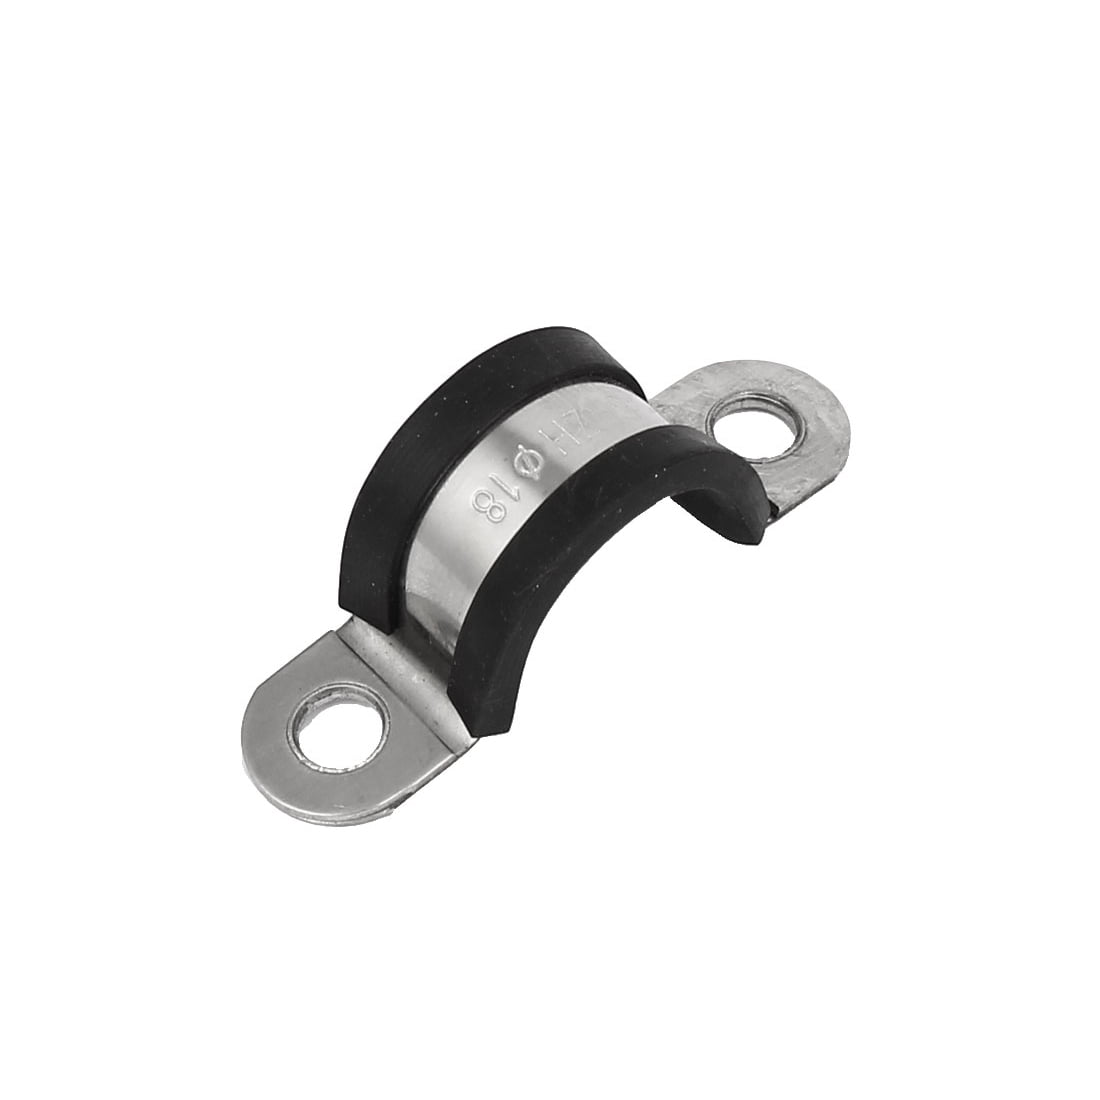 Aexit 18mm U Clips EPDM Rubber Lined Mounting Brackets Clamps 5pcs for Pipe Tube Cable 3a4a8dd6da377c0bfbaa84e692b5be01